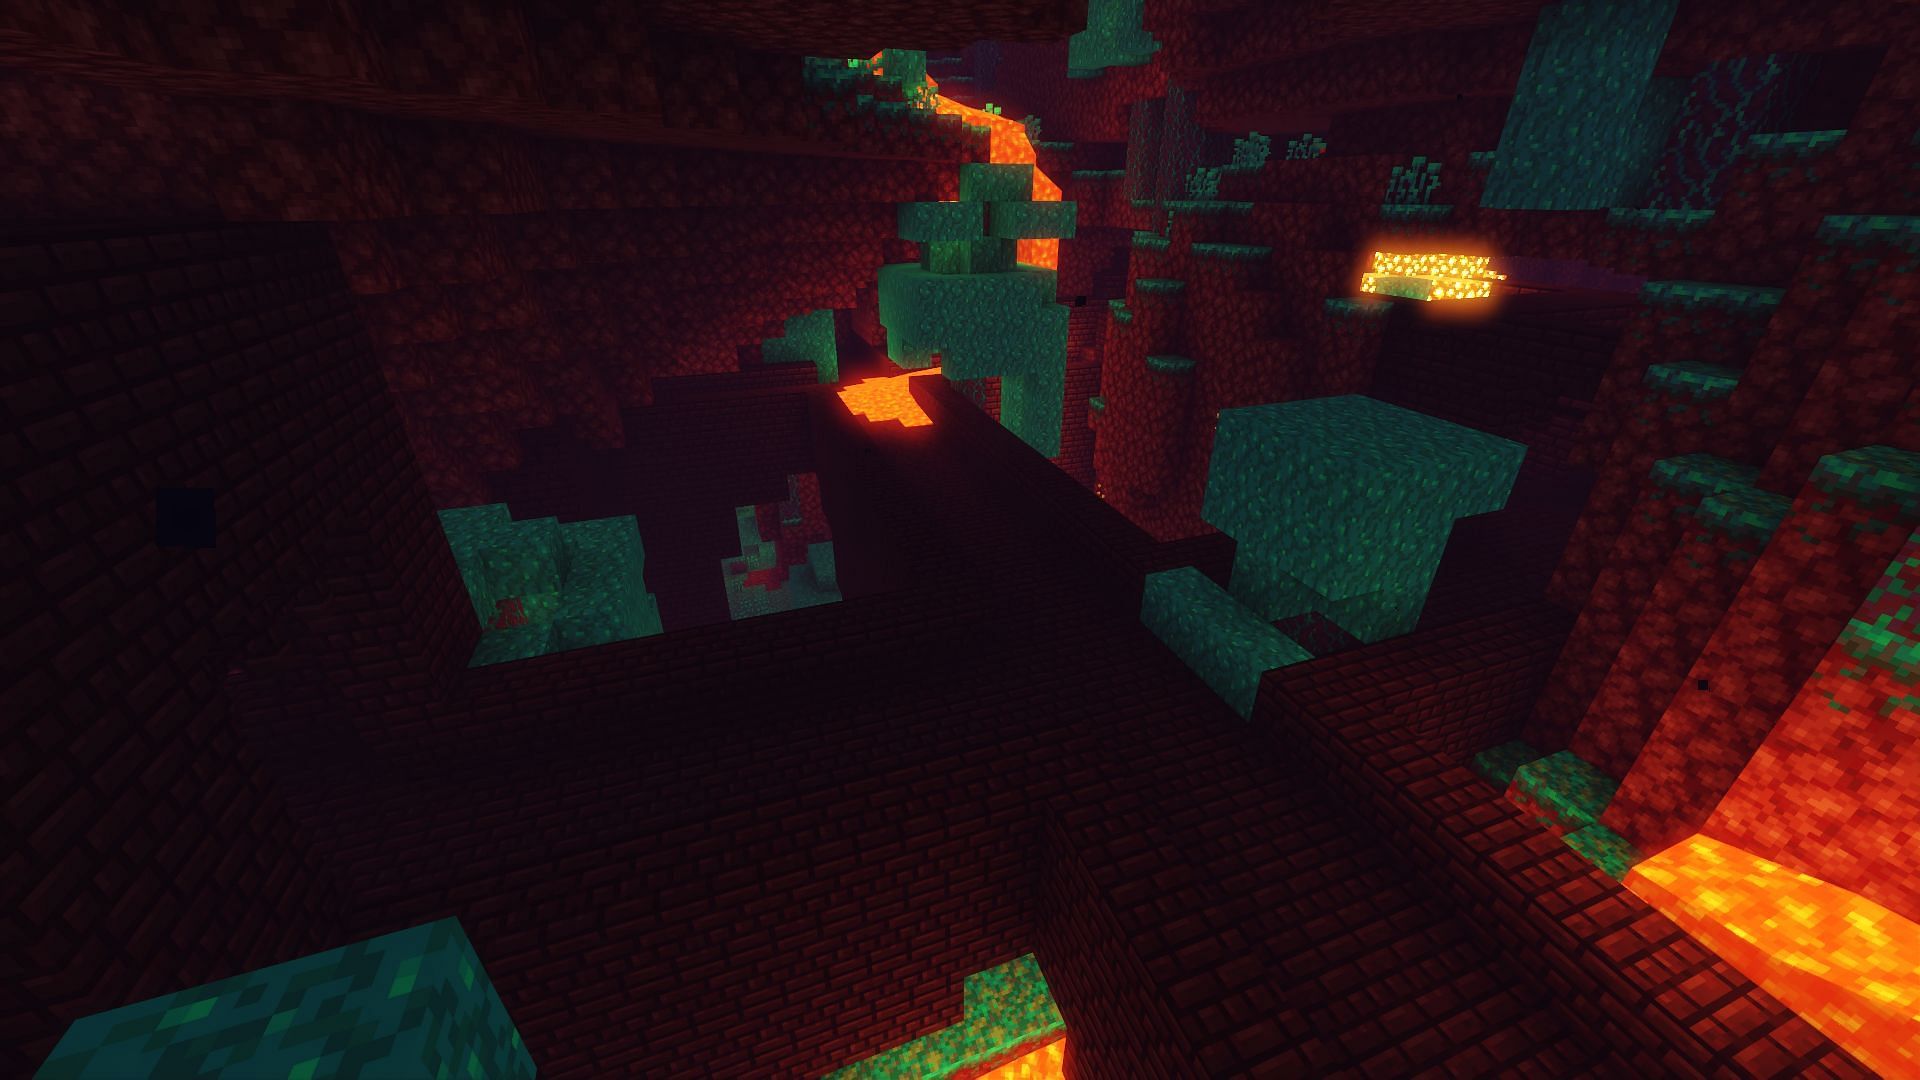 Nether fortresses can spawn in walls and underground, leading to strange sights (Image via Mojang)